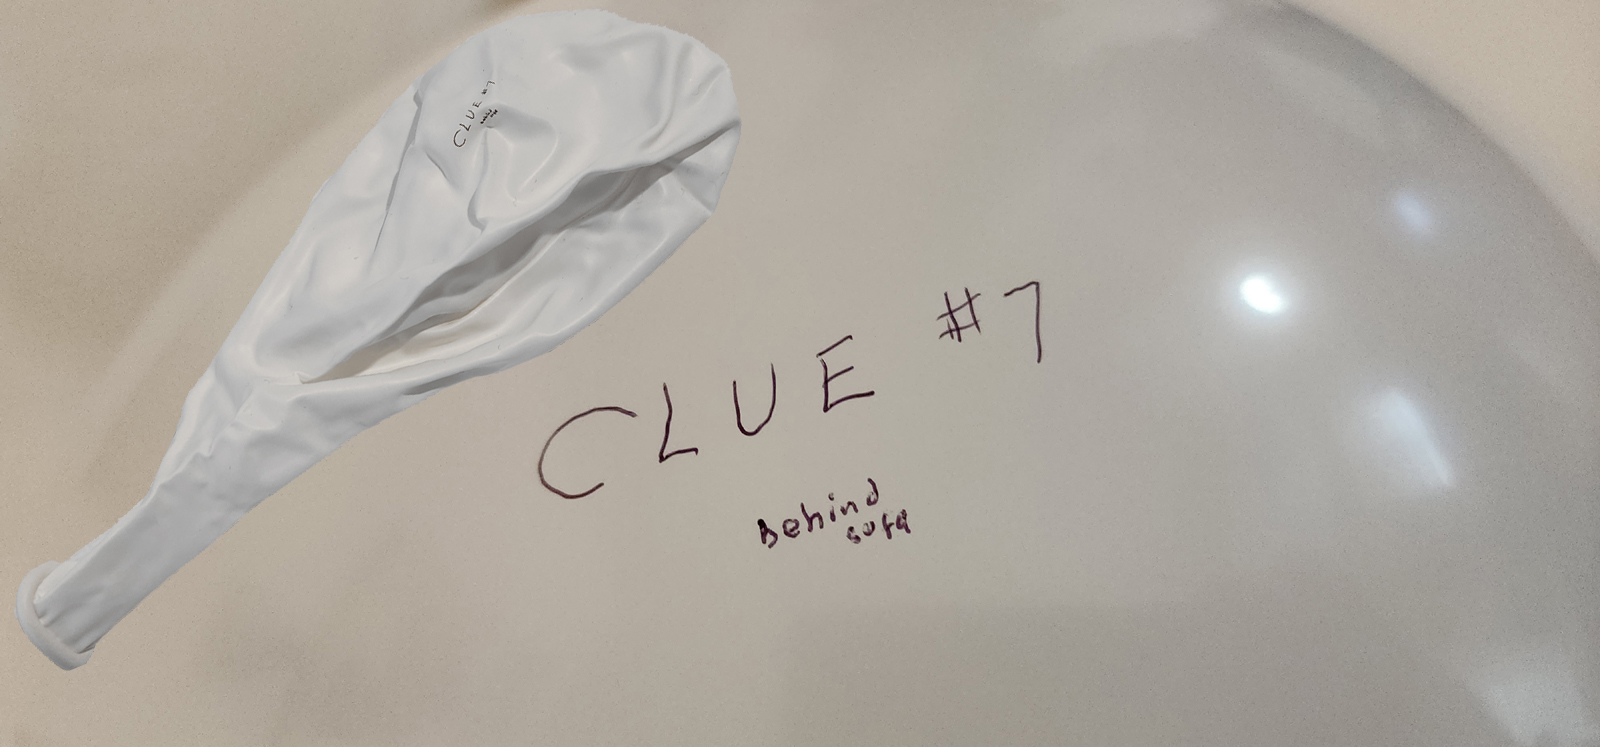 Clue written on inflated balloon with a photo of the same balloon that was shrunken superimposed over the inflated balloon